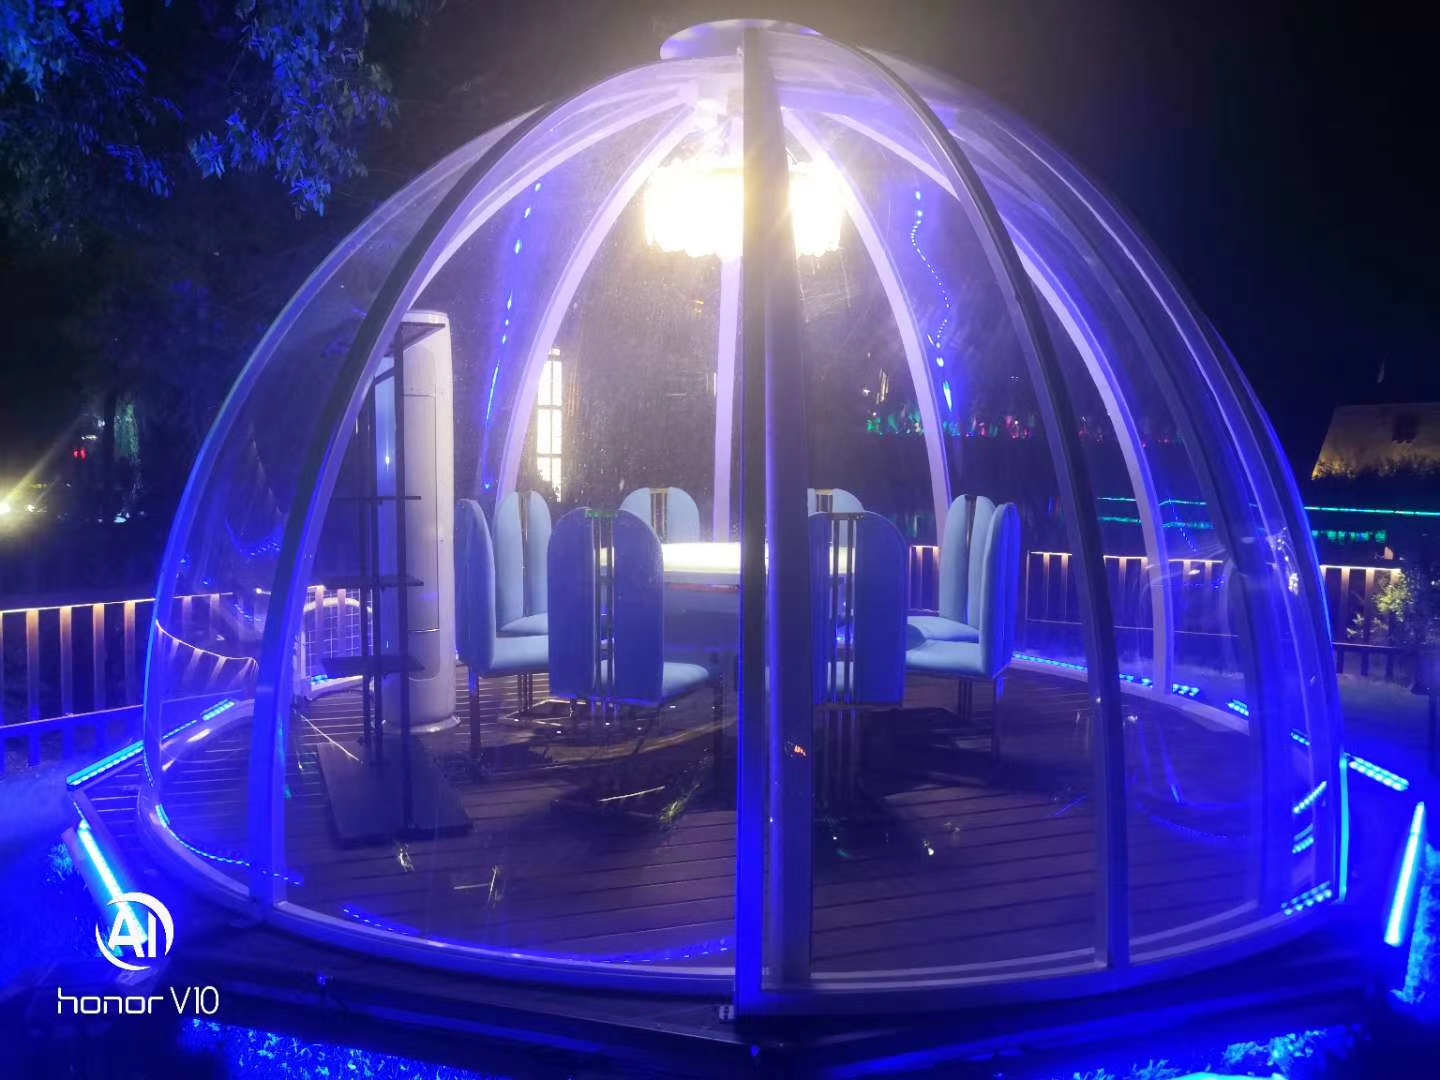 Commercial PC Spherical Tent Polycarbonate Dome Clear Dome Tent Inflatable Bubble Tent